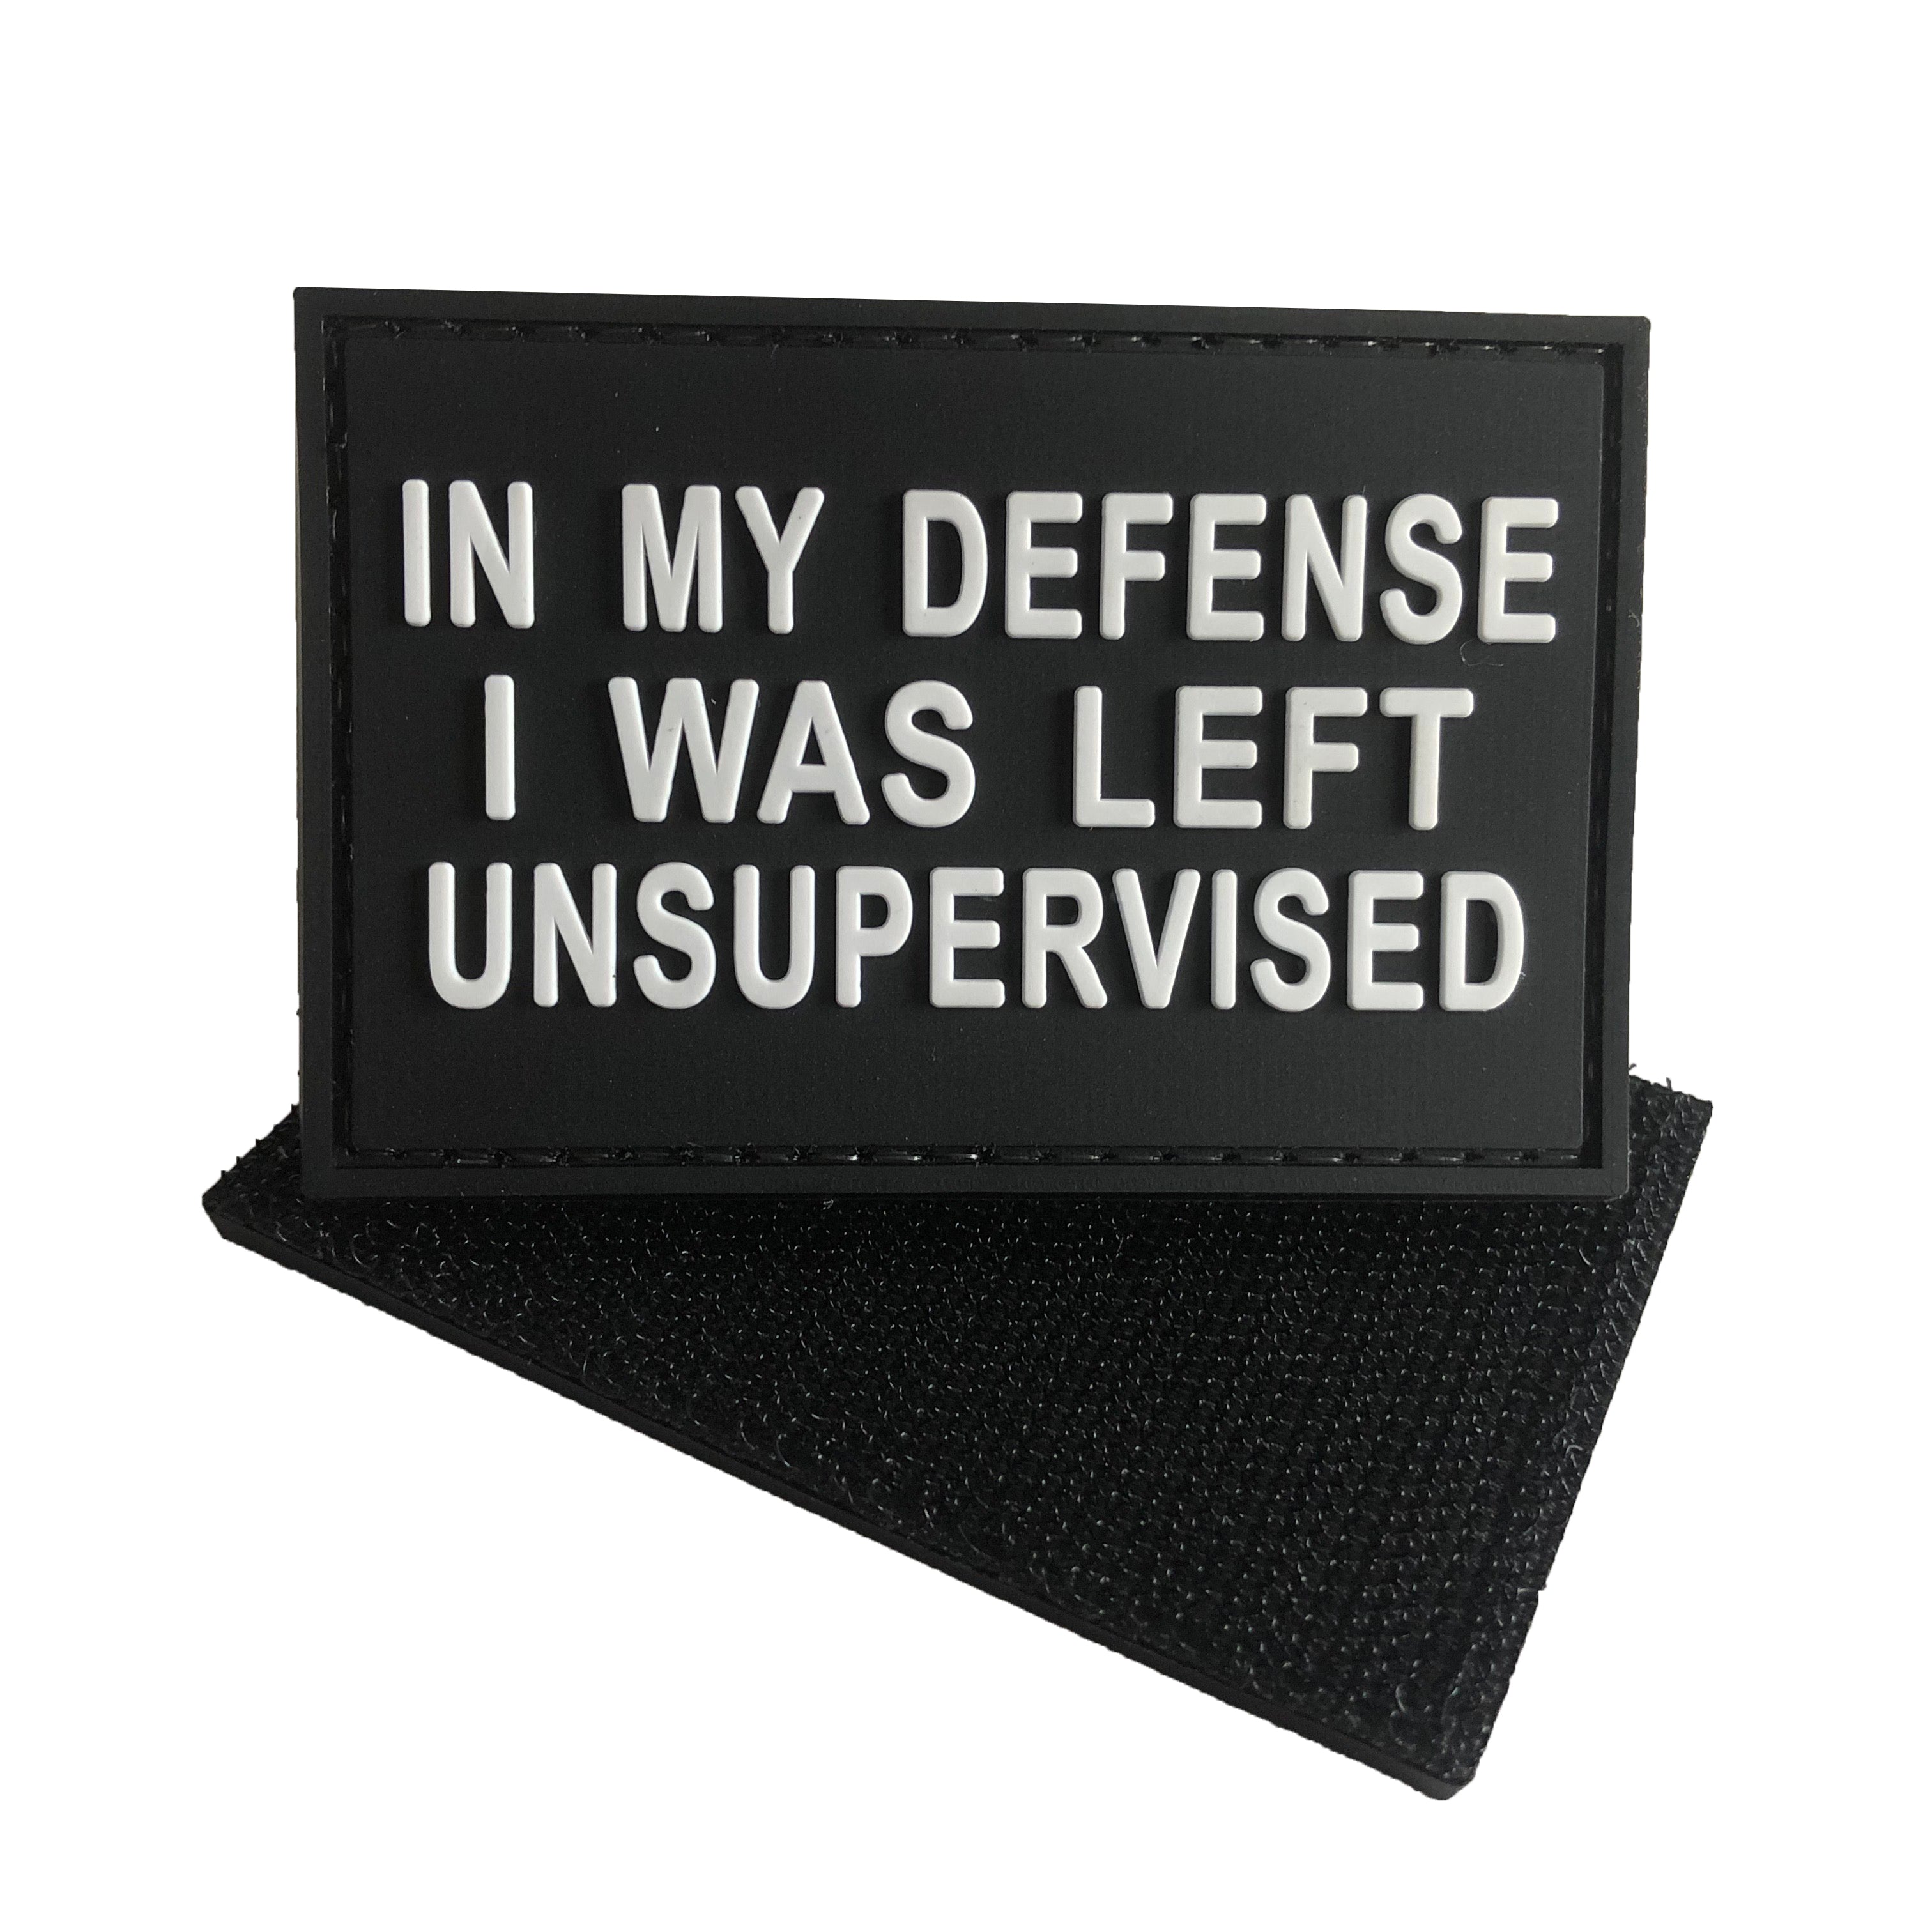 In My Defense I Was Left Unsupervised Patch